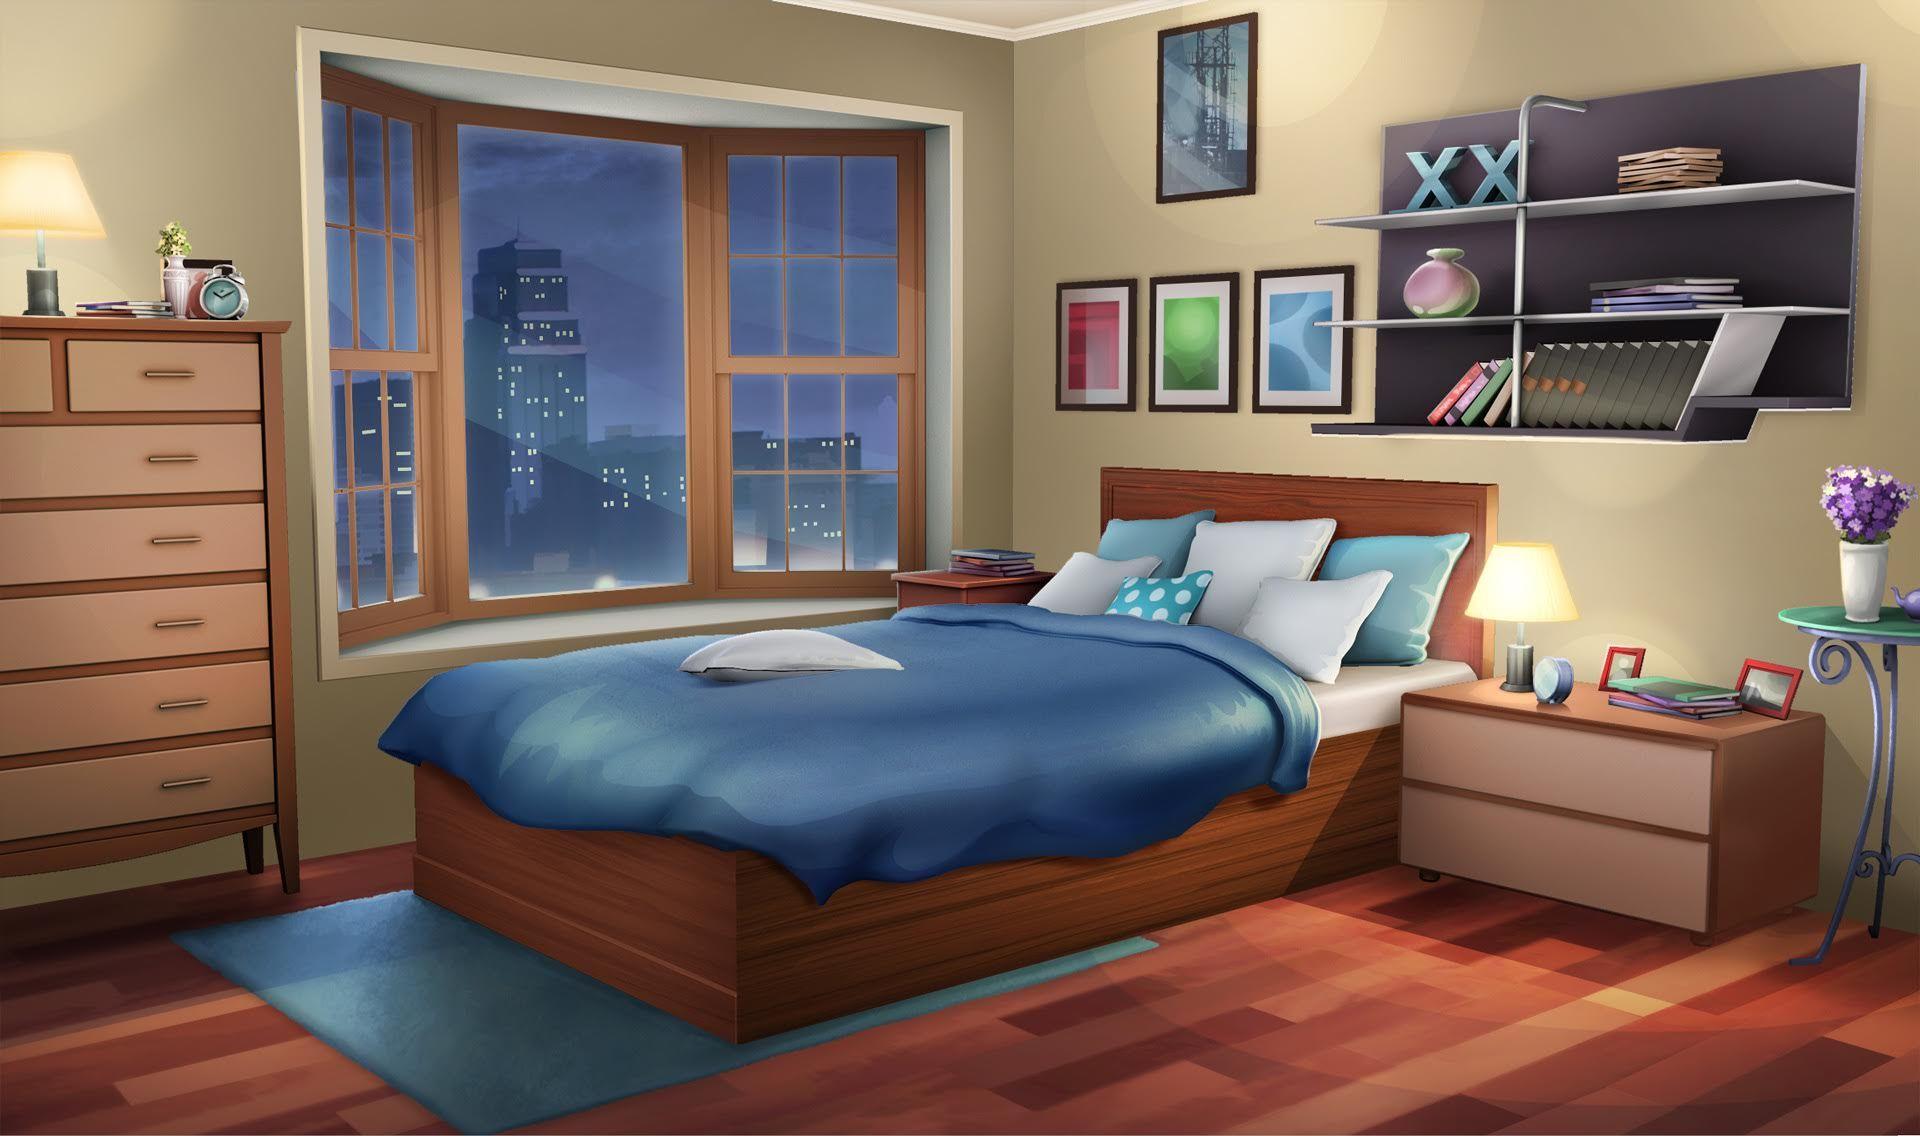 Bed Room  Night  Visual Novel Background by giaonp on DeviantArt   Episode interactive backgrounds Anime house Bedroom night